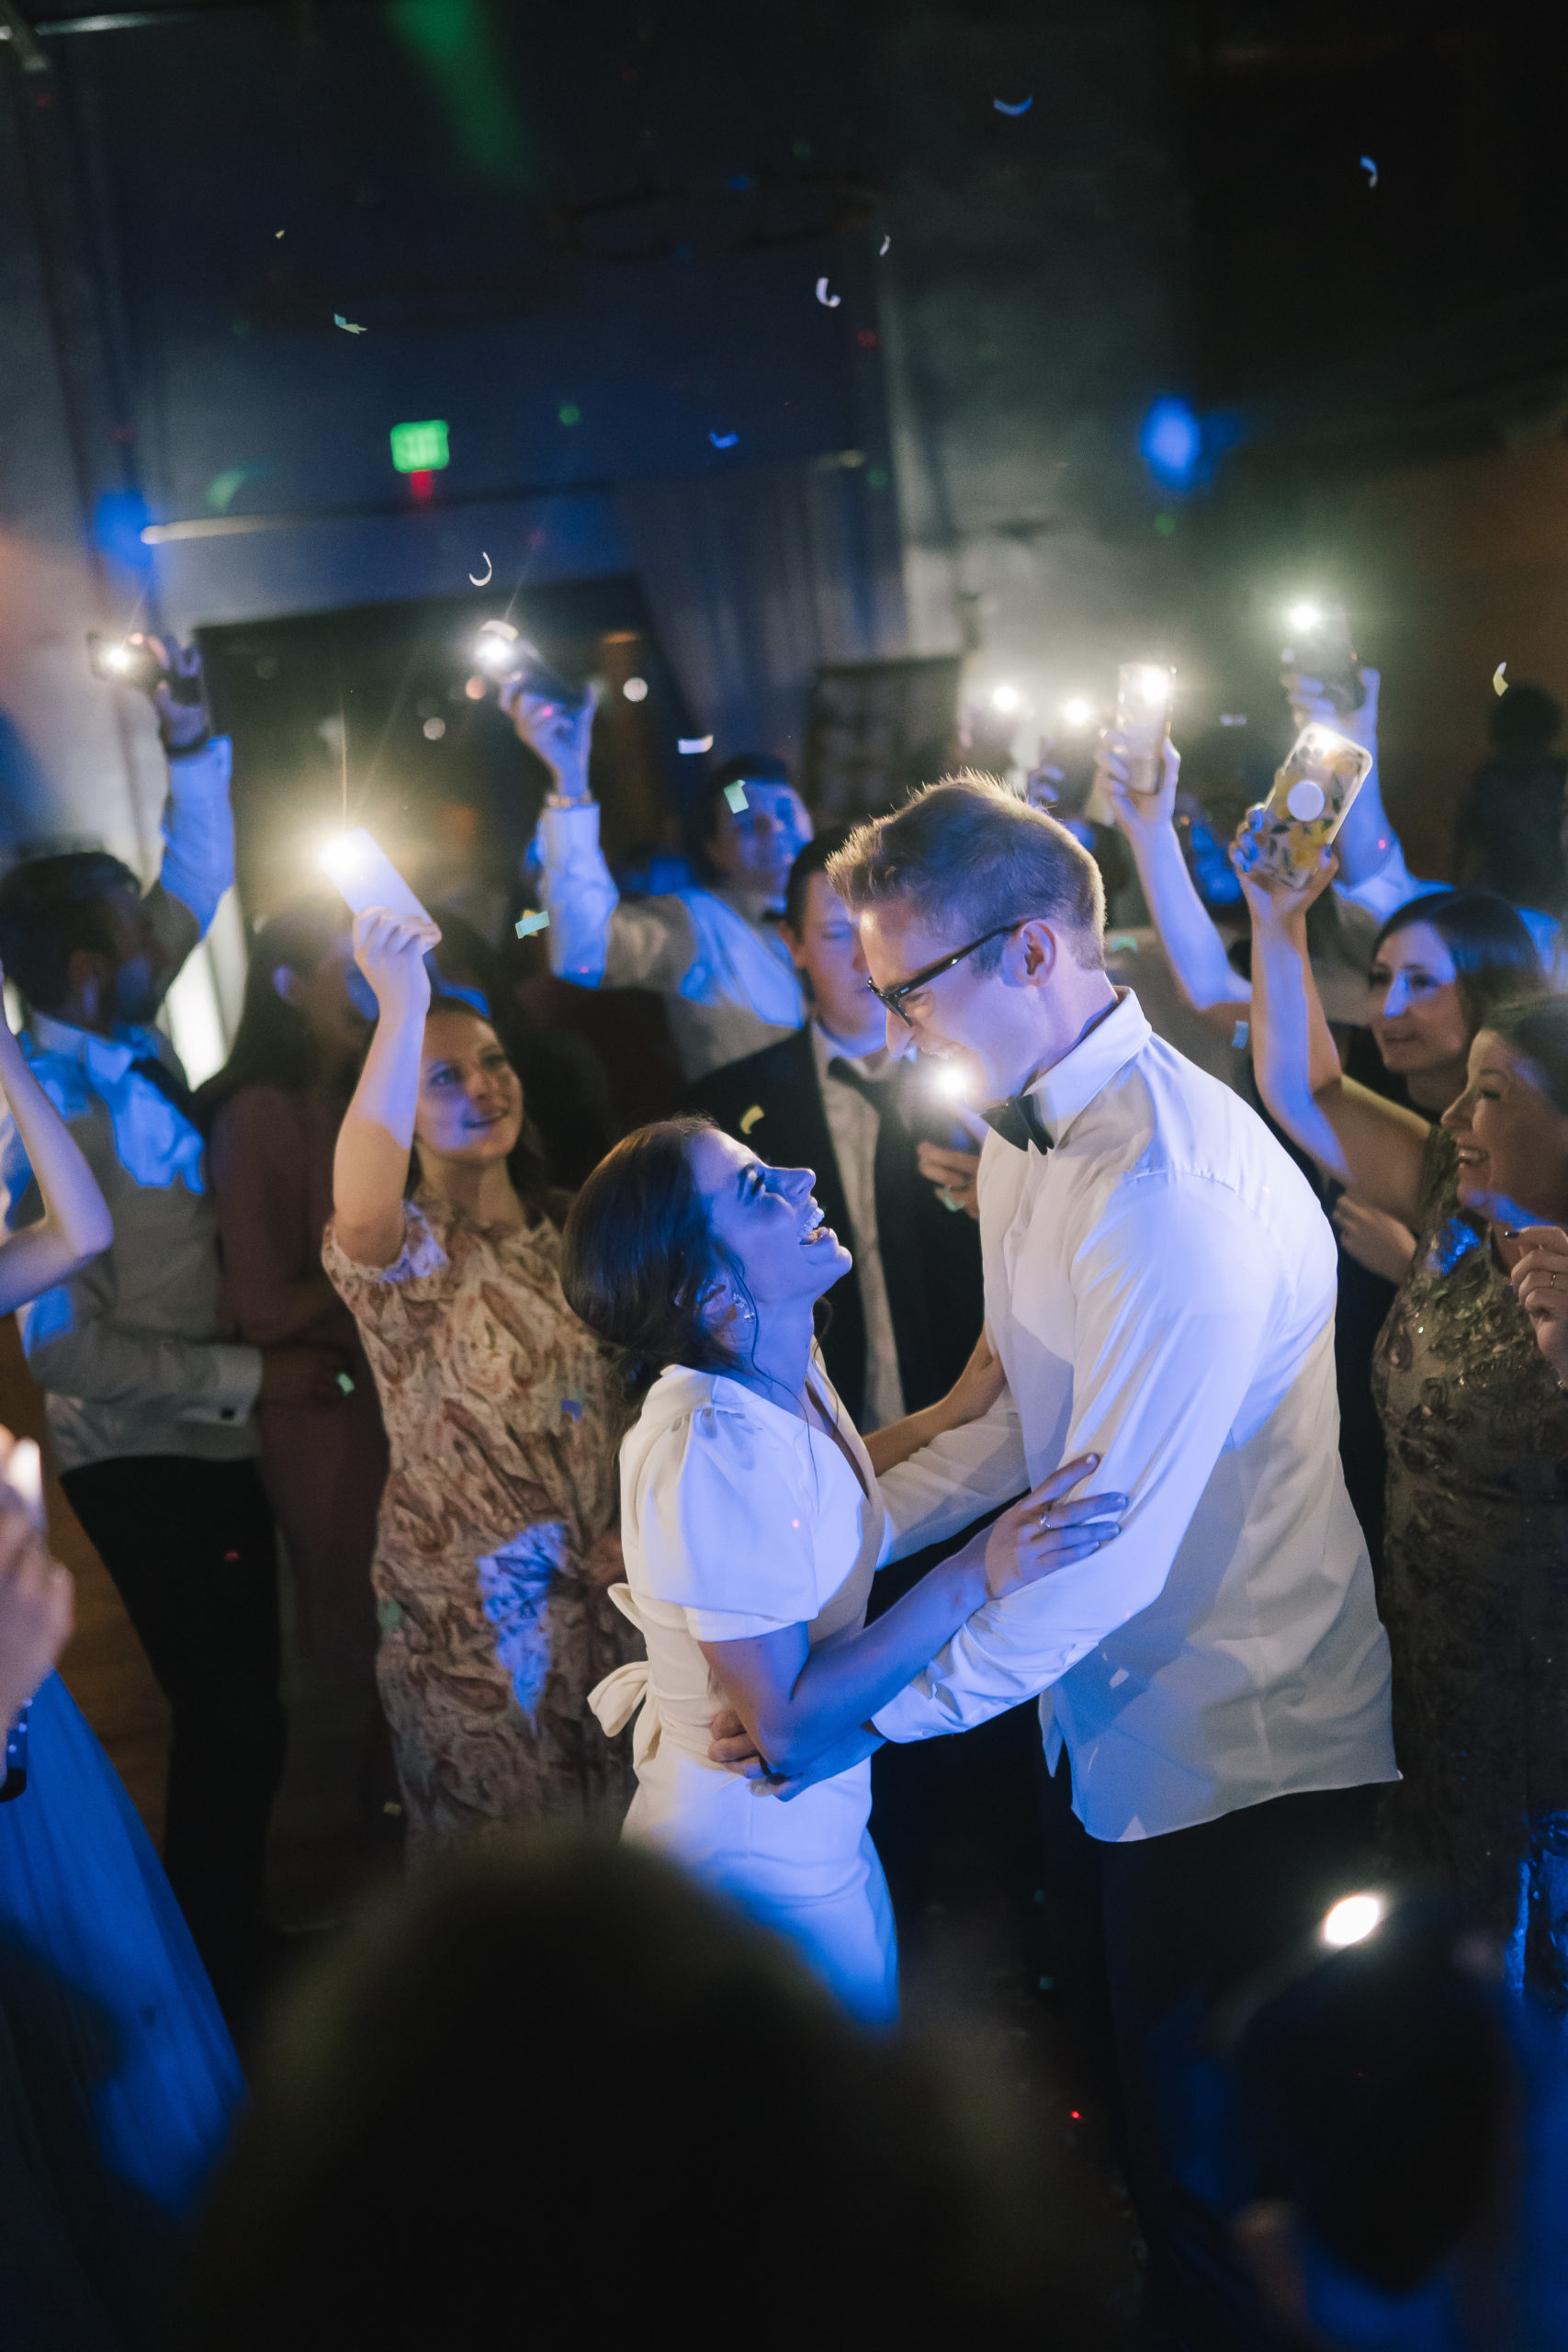 reception party with bride and groom dancing and everyone around them holding their phone cameras in the air